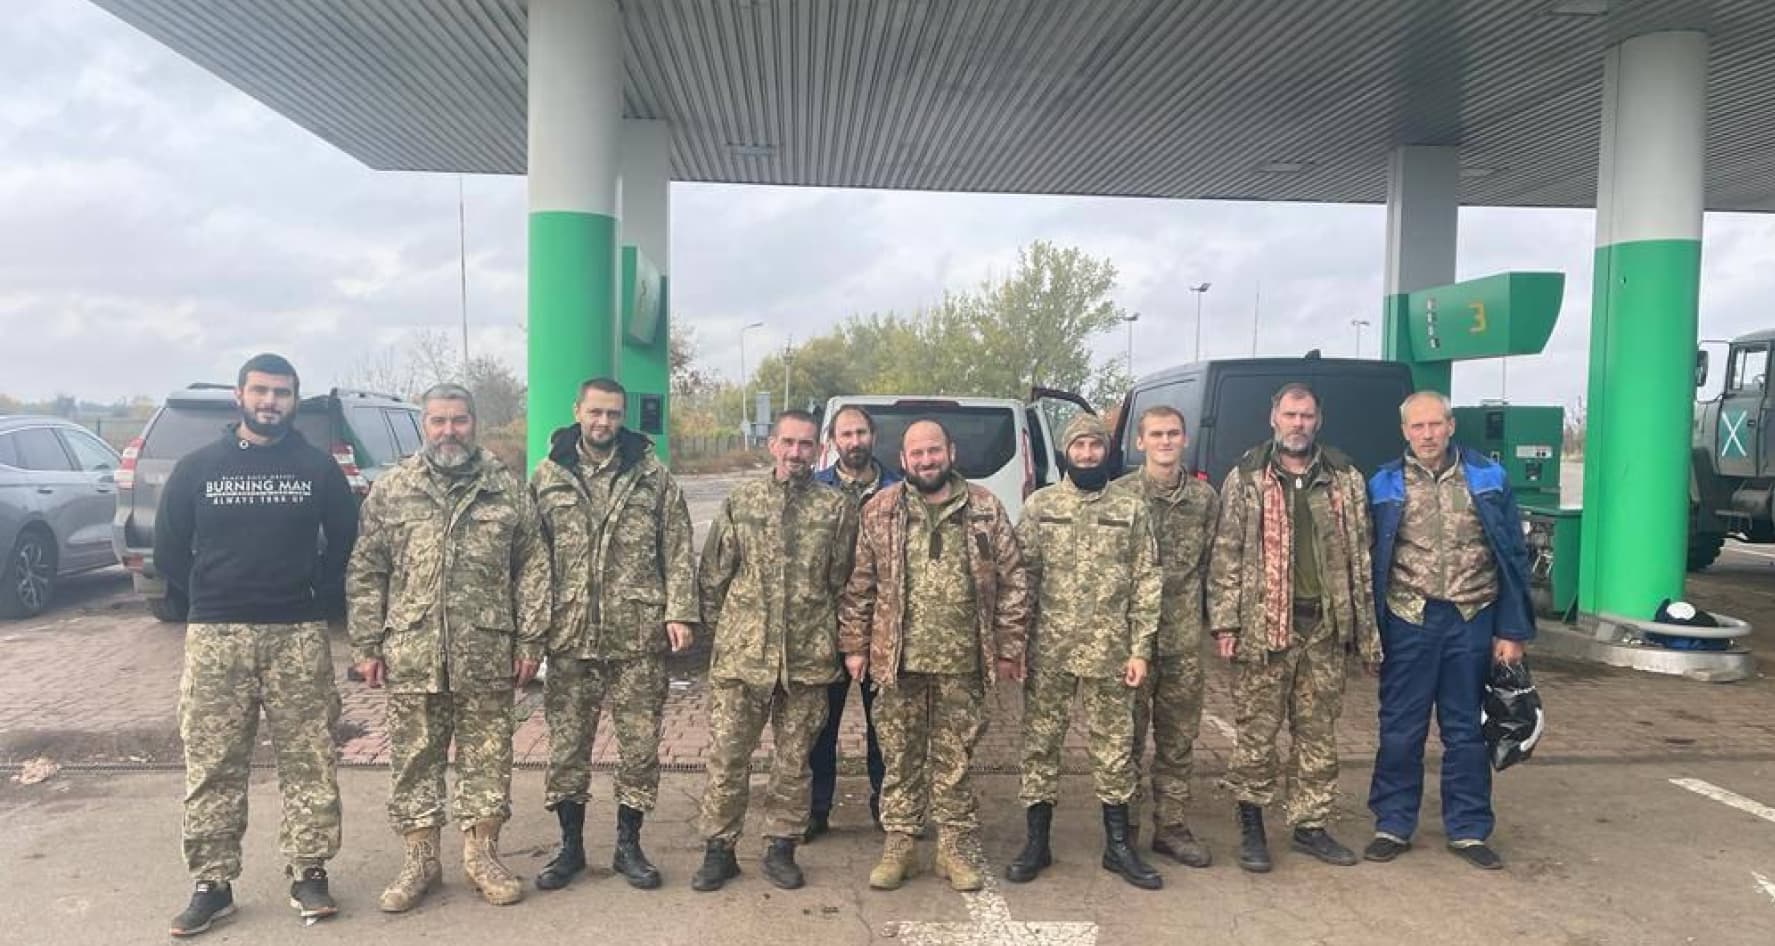 10 soldiers of the Armed Forces of Ukraine were released from captivity as part of another exchange